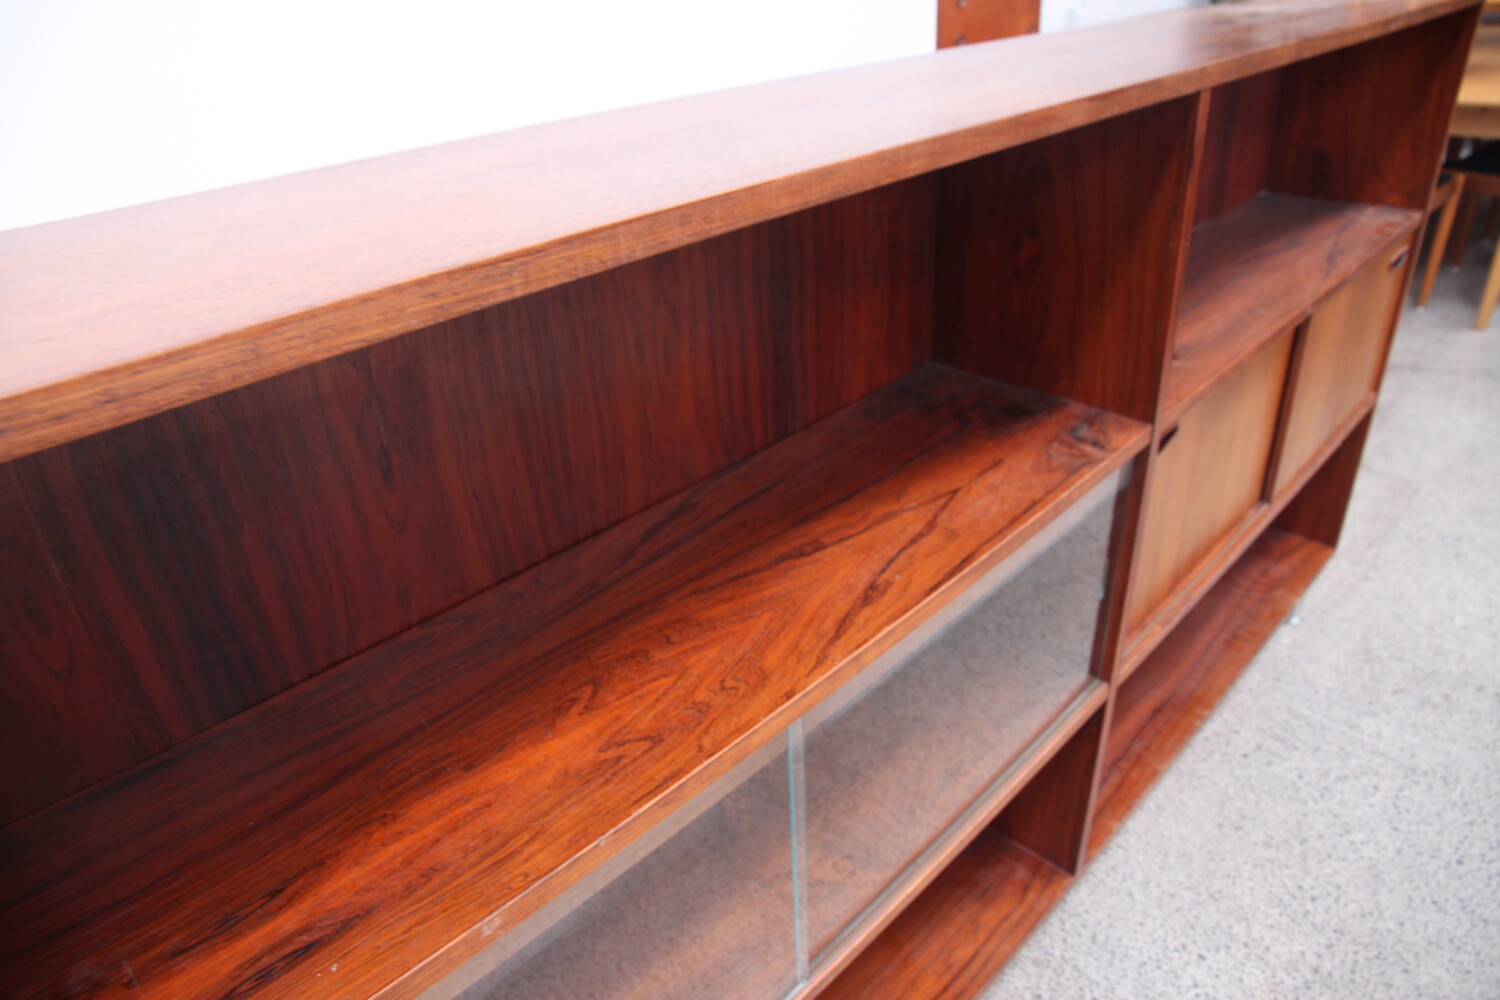 Rosewood Bookcase